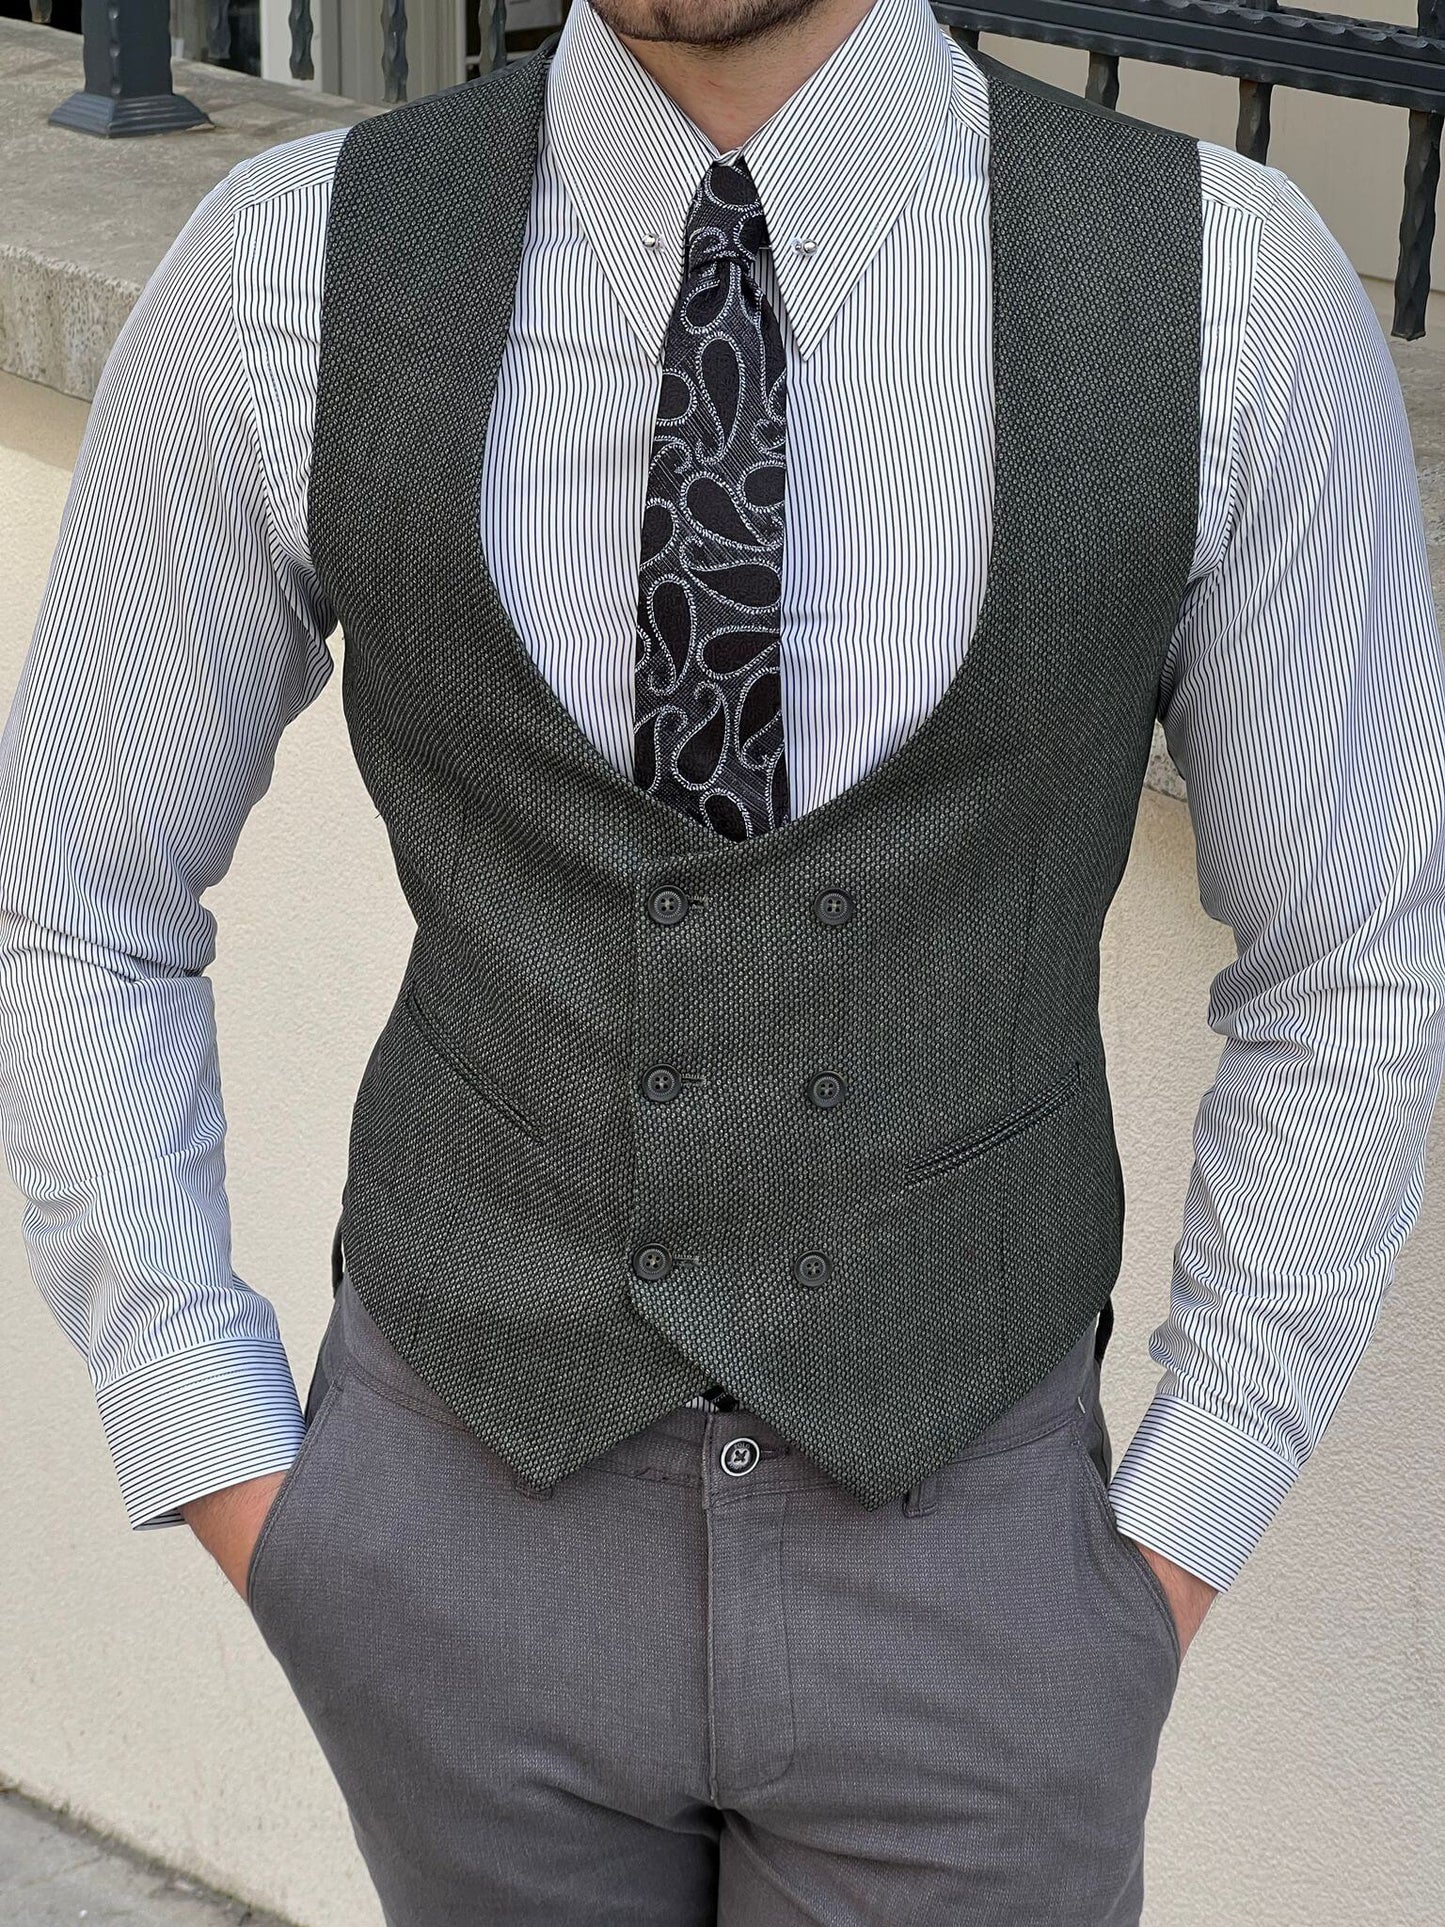 A vibrant green double-breasted vest with a sleek, tailored fi